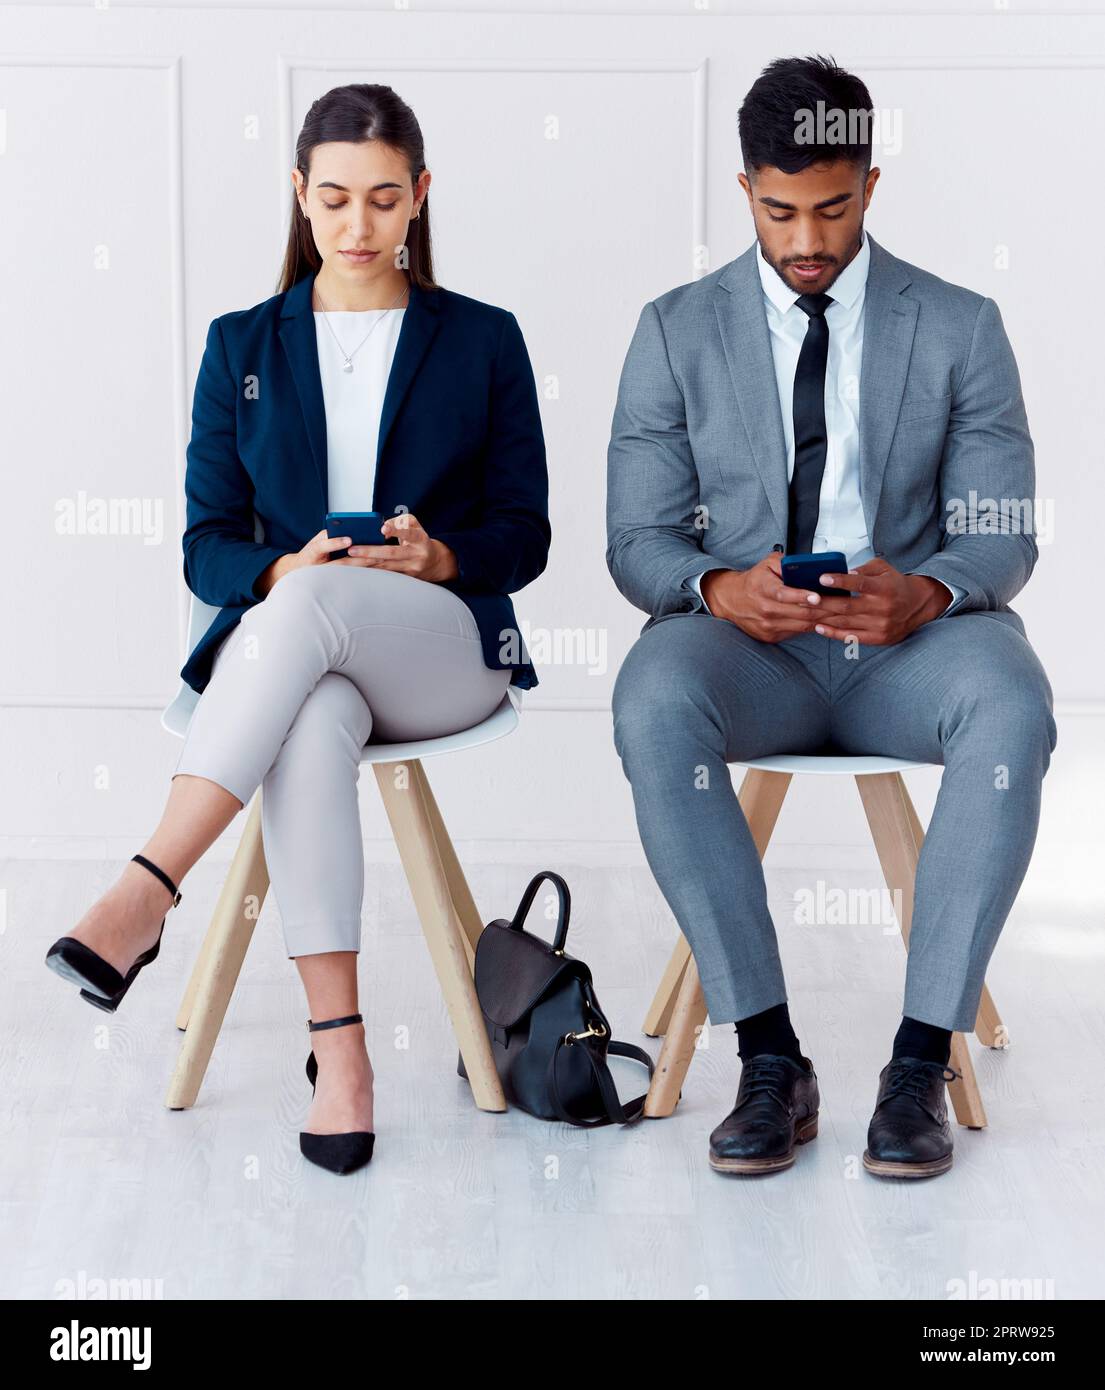 Hiring, interview and phone of businessman and woman with diversity in a office waiting room. Corporate potential workers wait for a company human resources meeting with technology and 5g internet Stock Photo